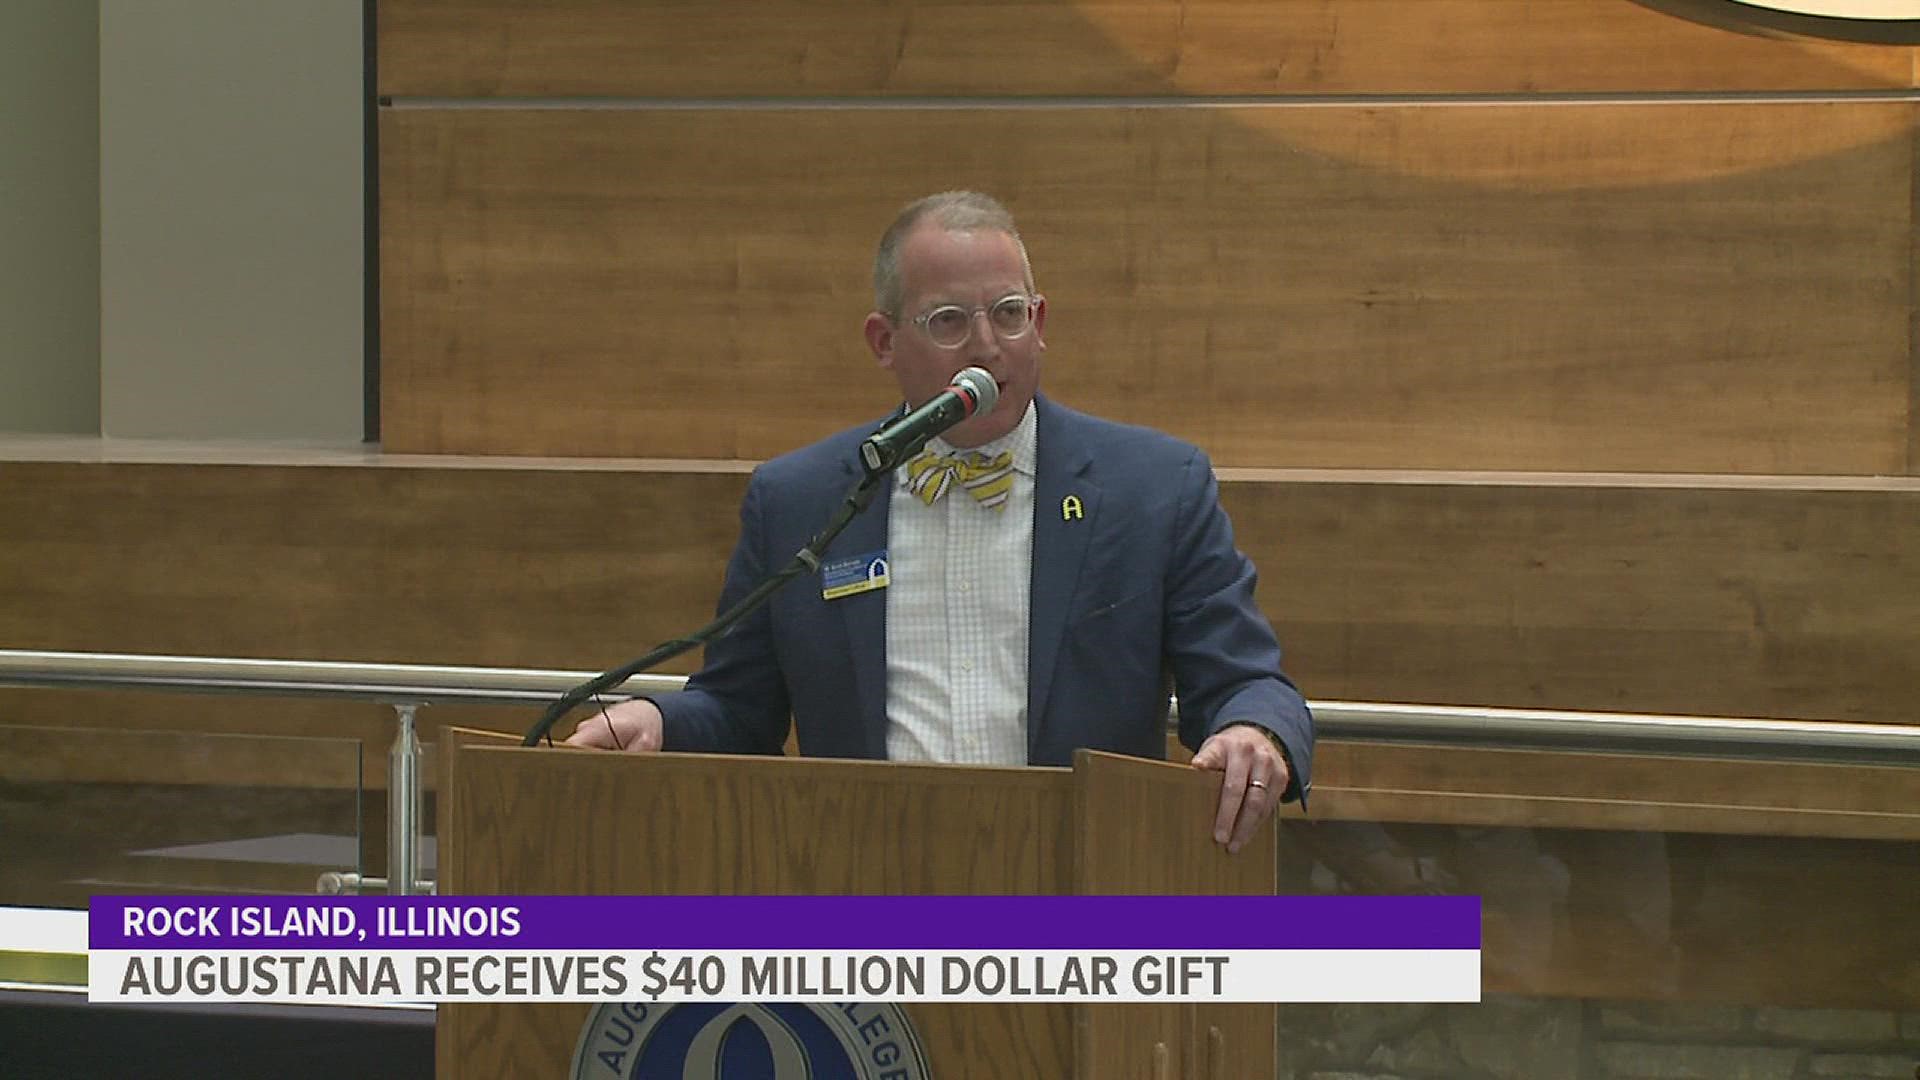 1975 graduate Murray Gerber is committing to match gifts, dollar for dollar providing an extra $80M to Augustana's endowment.